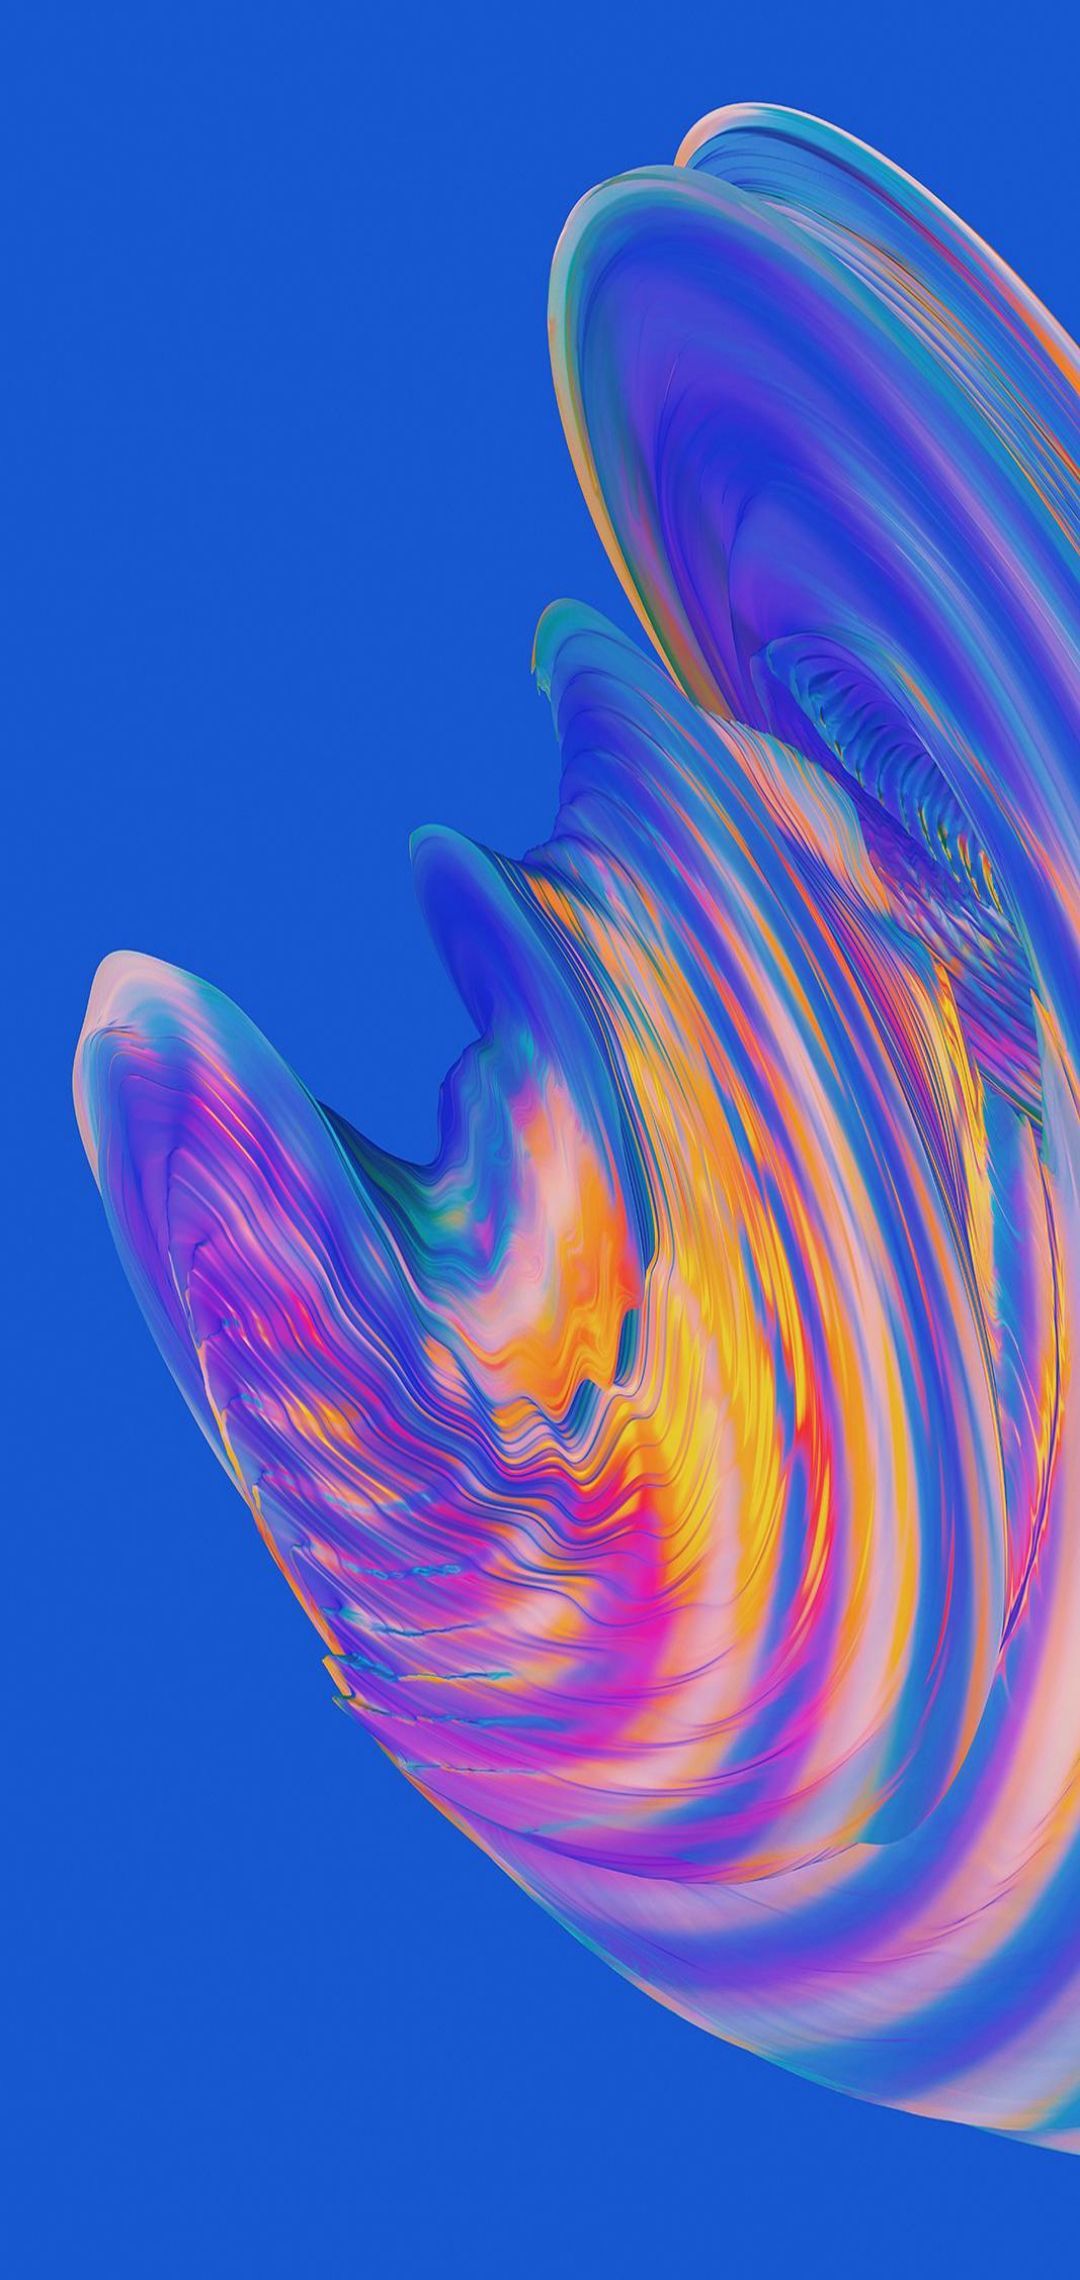 Paranoid Android 2019 Stock Wallpaper 05 - [1080x2280]